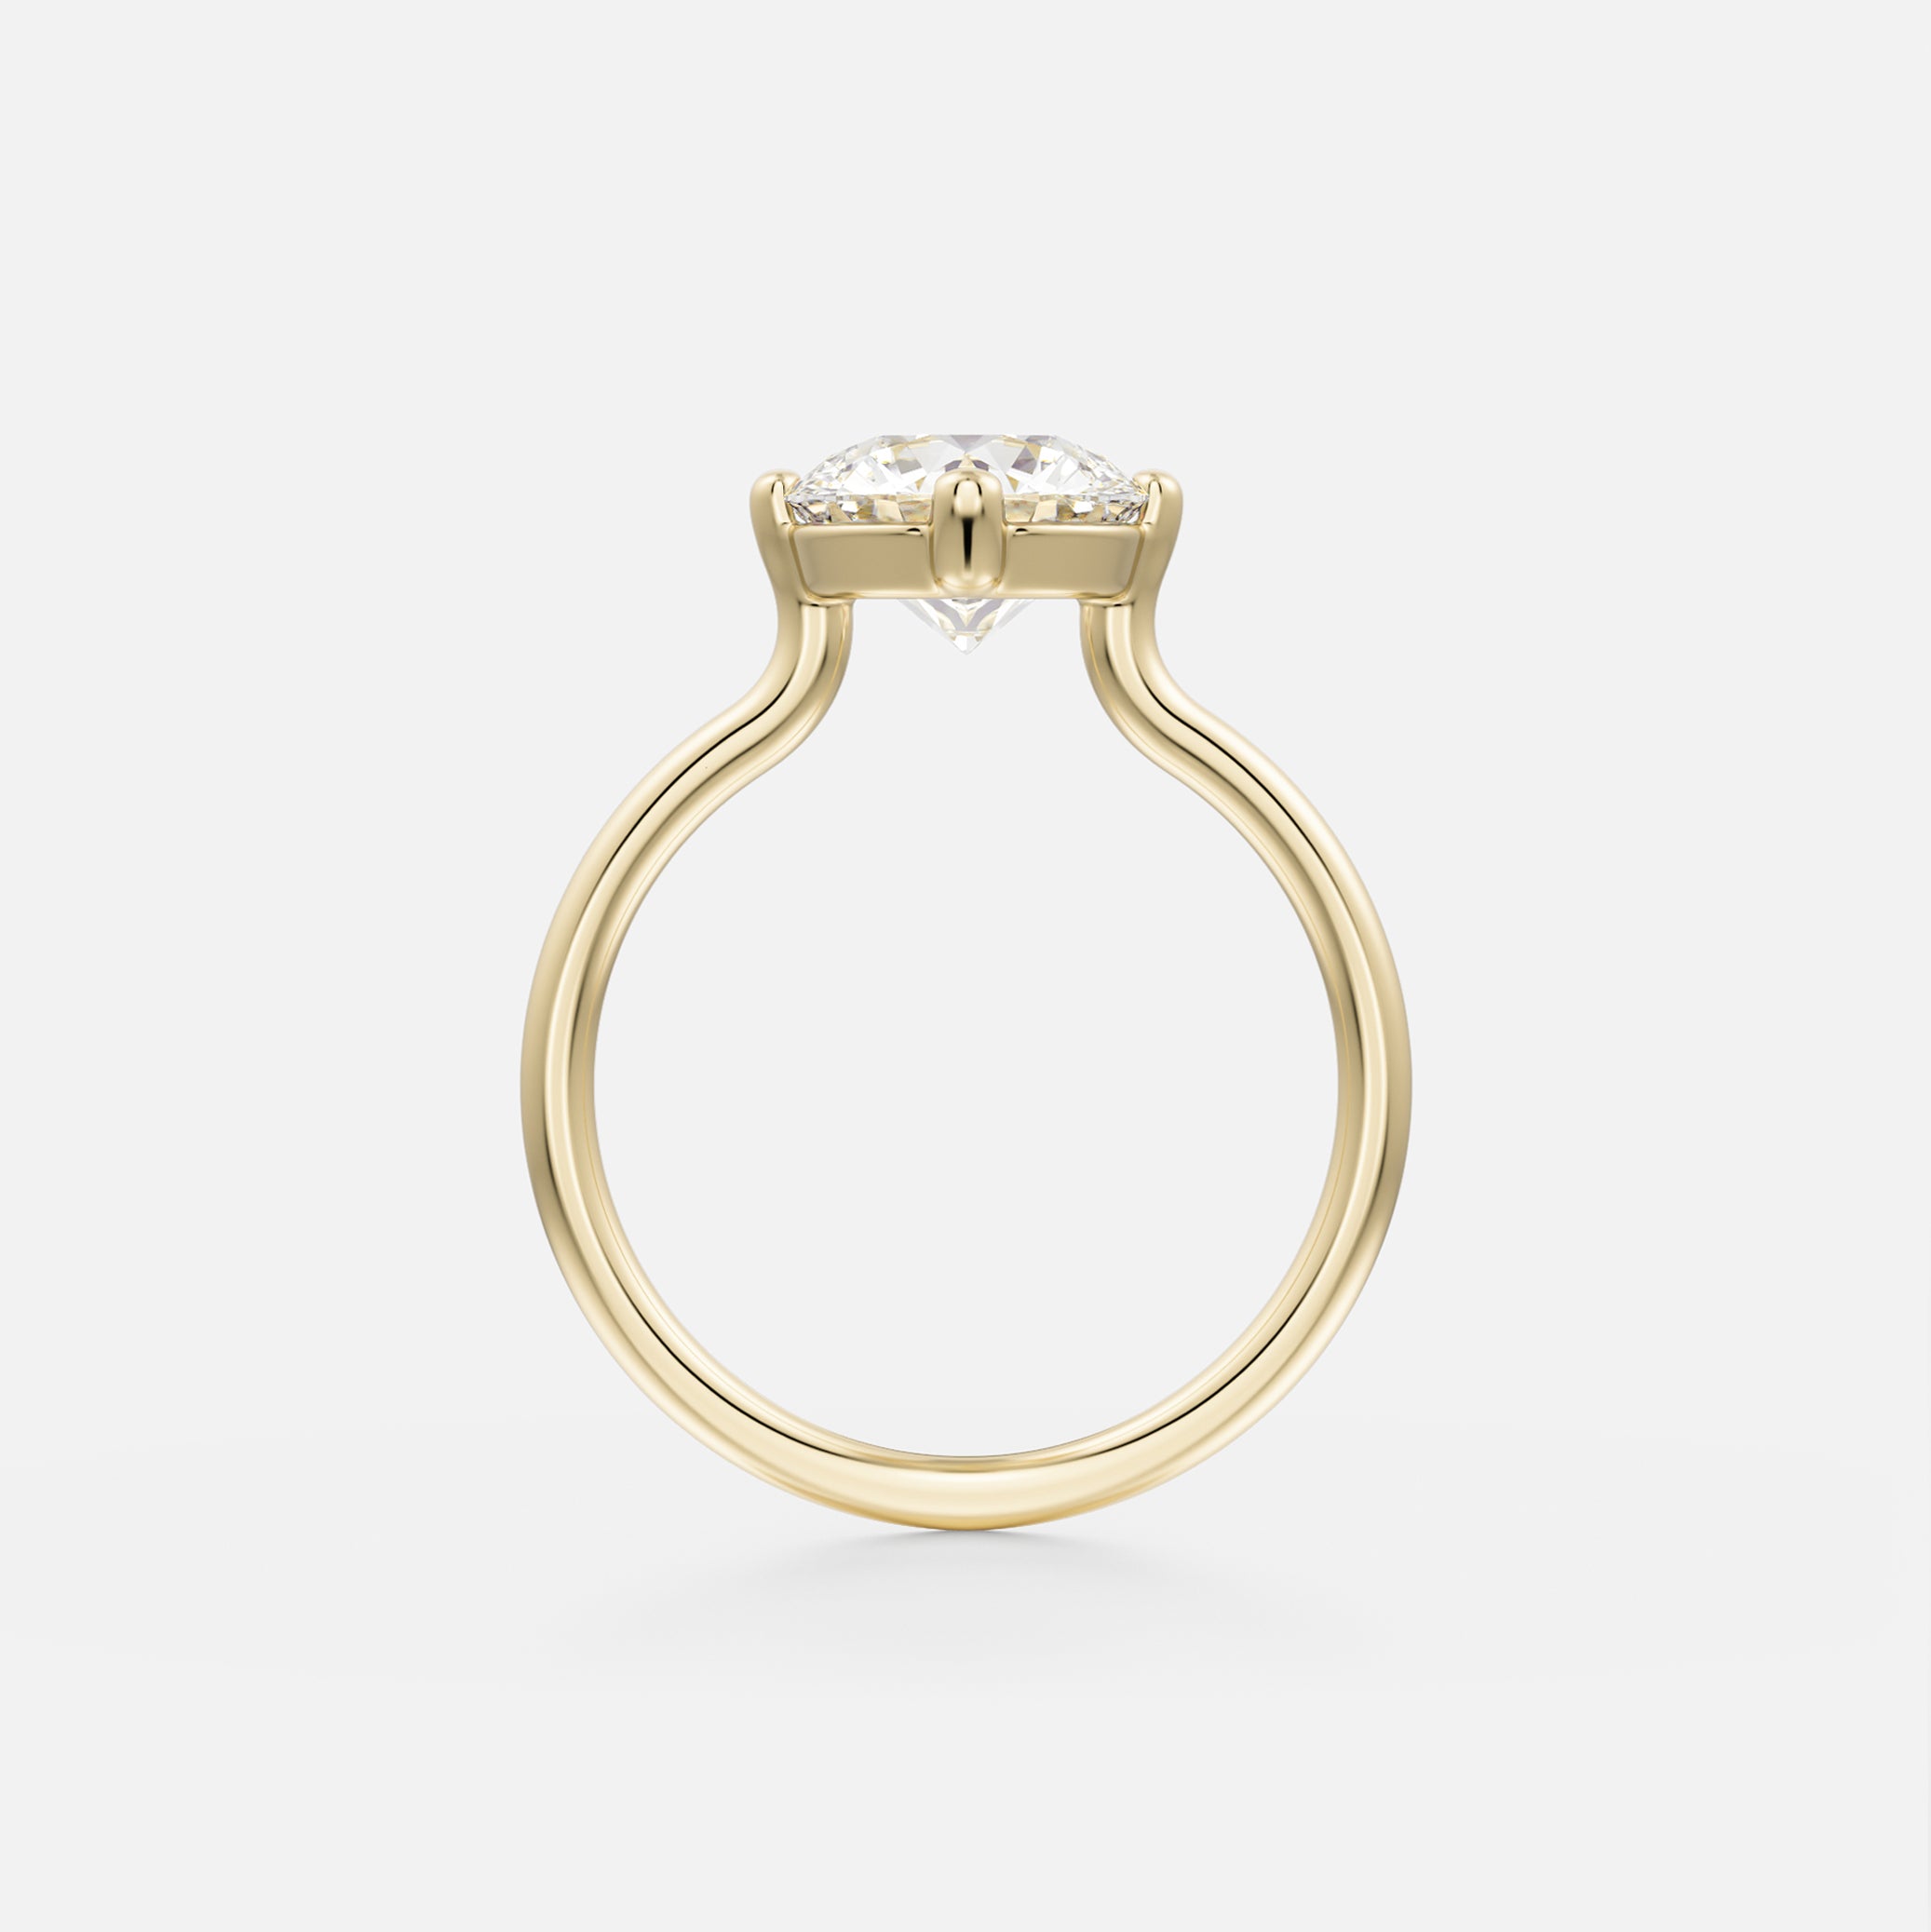 Veli Round Band with Round Modern Engagement Ring Setting in  sustainable 14k yellow, white, or rose Gold or platinum by SHW Fine Jewelry NYC